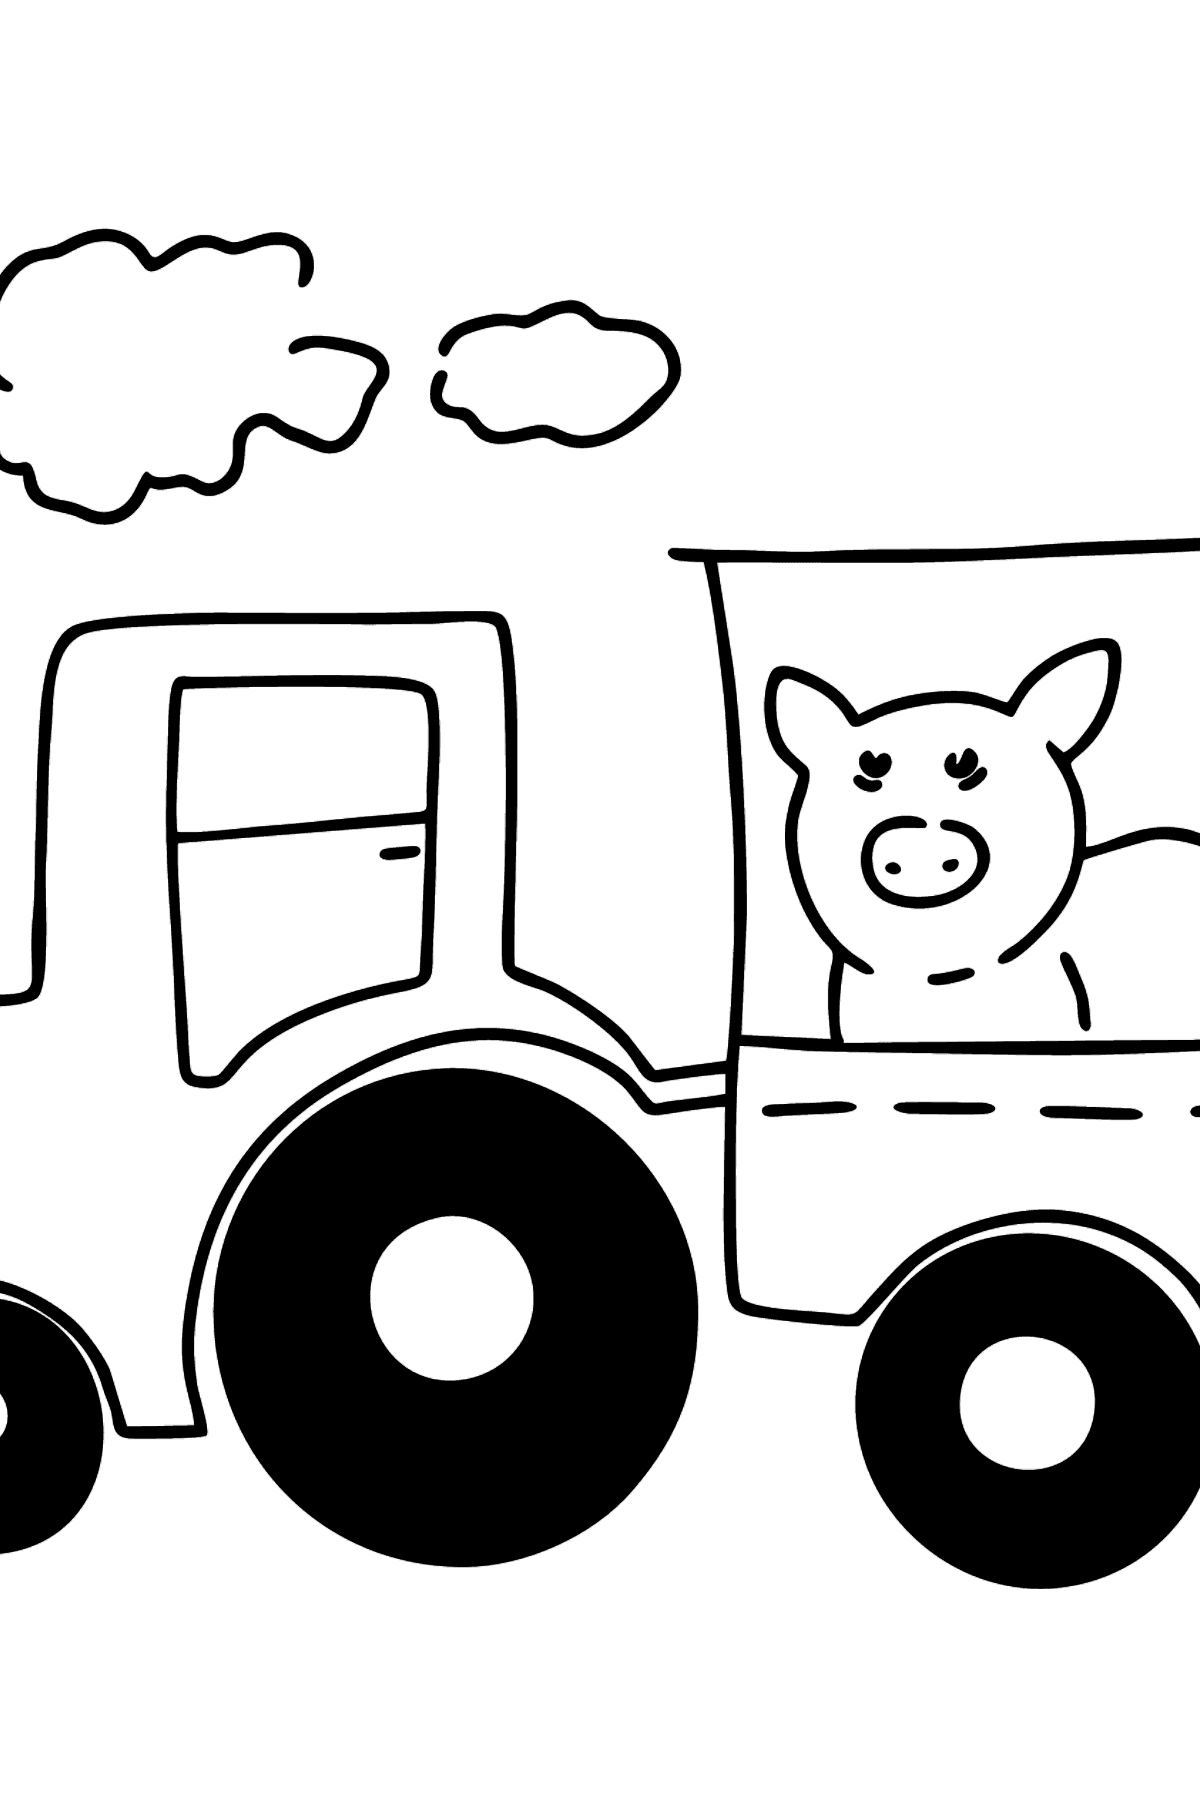 Tractor with Trailer coloring page - Coloring Pages for Kids